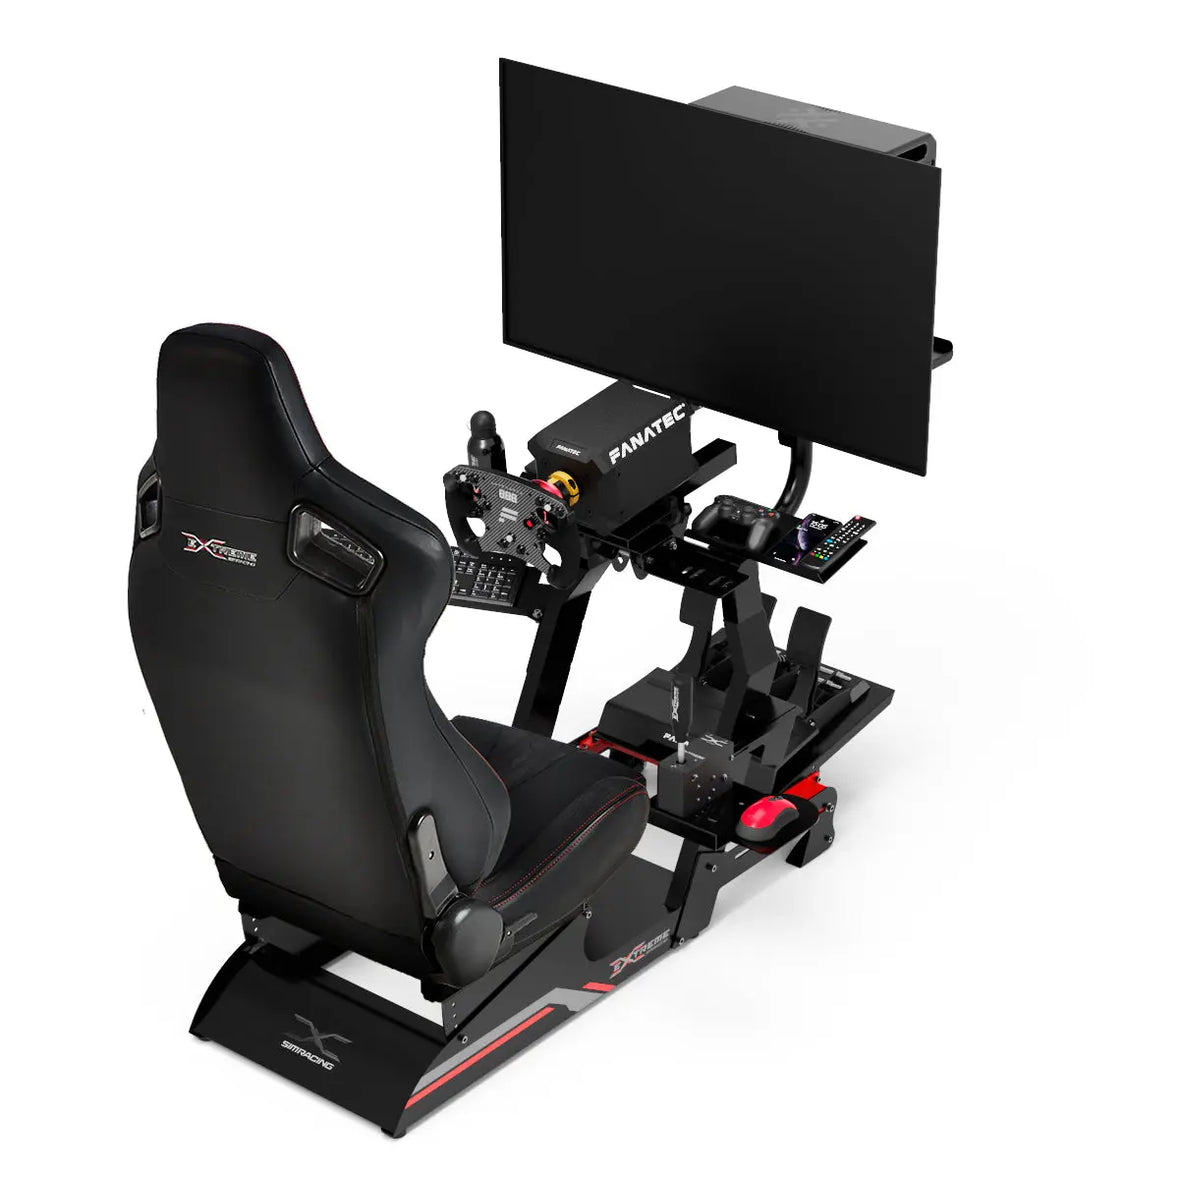 Extreme SimRacing Cockpit Virtual Experience 3.0 Fully